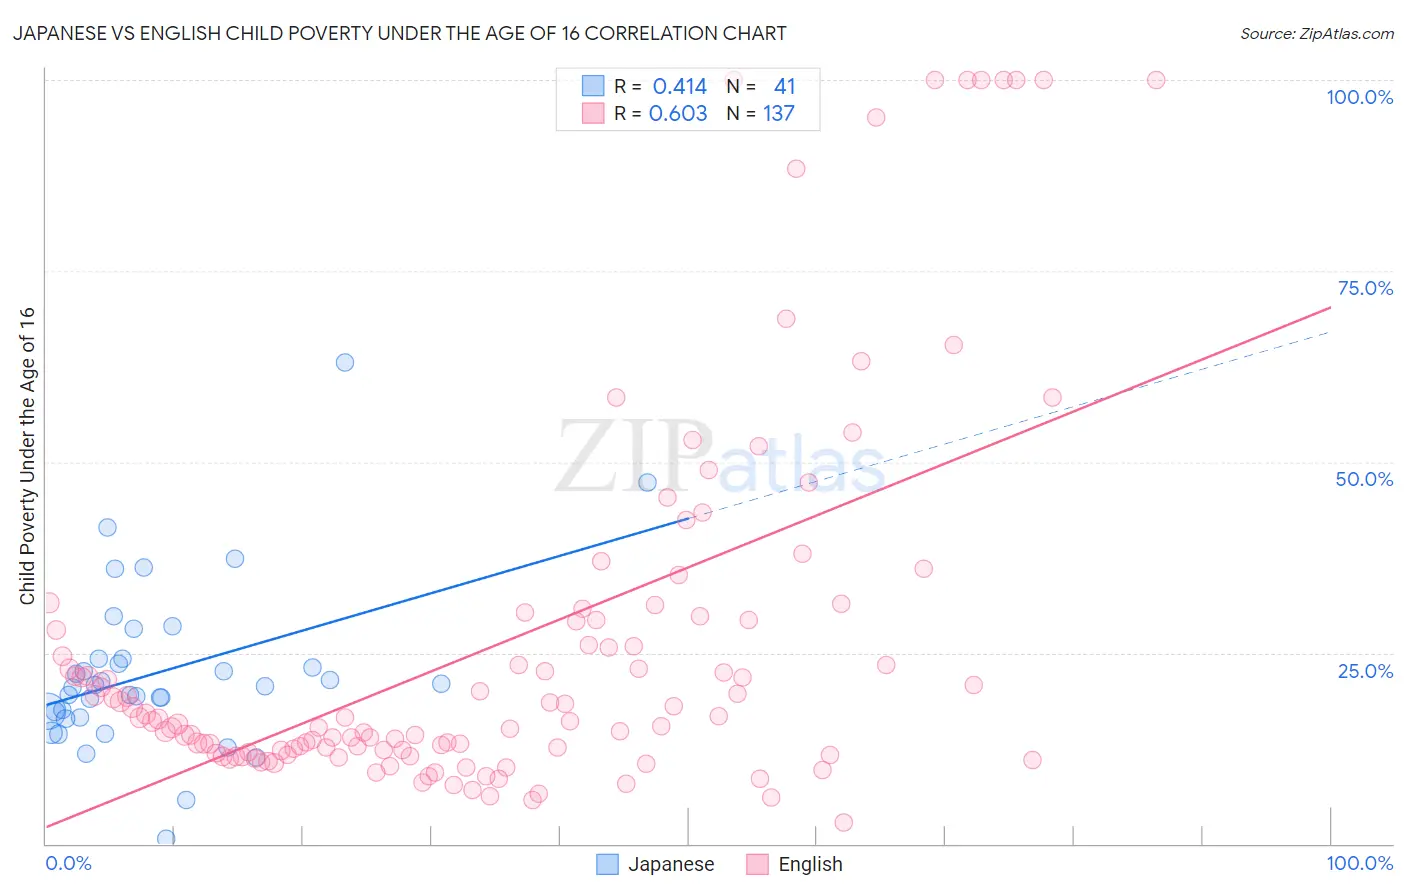 Japanese vs English Child Poverty Under the Age of 16